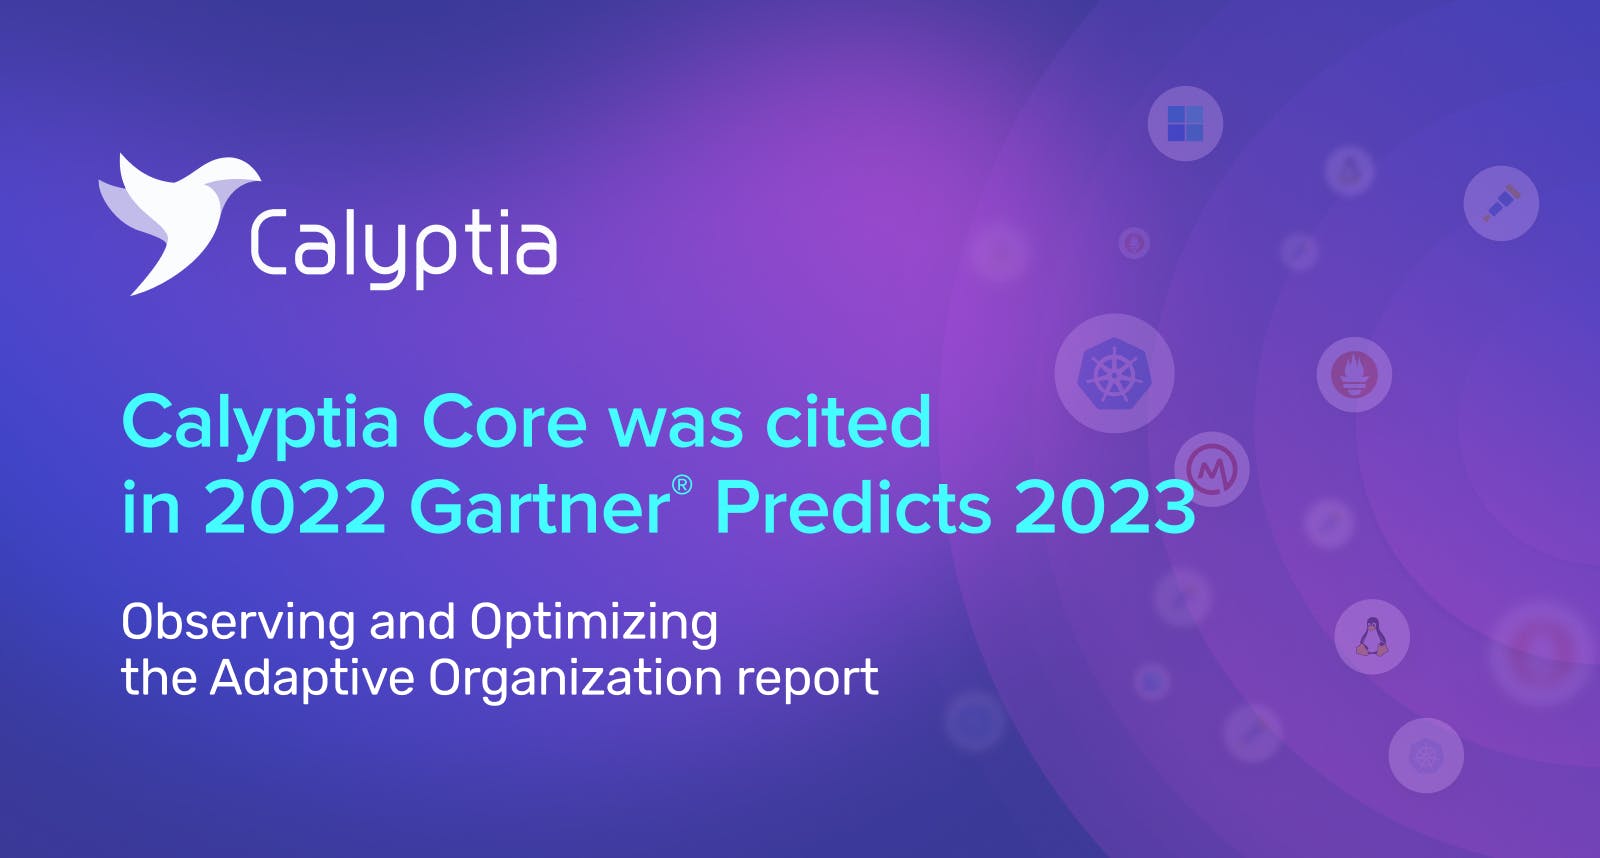 Calyptia Core was cited in 2022 Gartner Predicts 2023 Observing and Optimizing the Adaptive Organization report